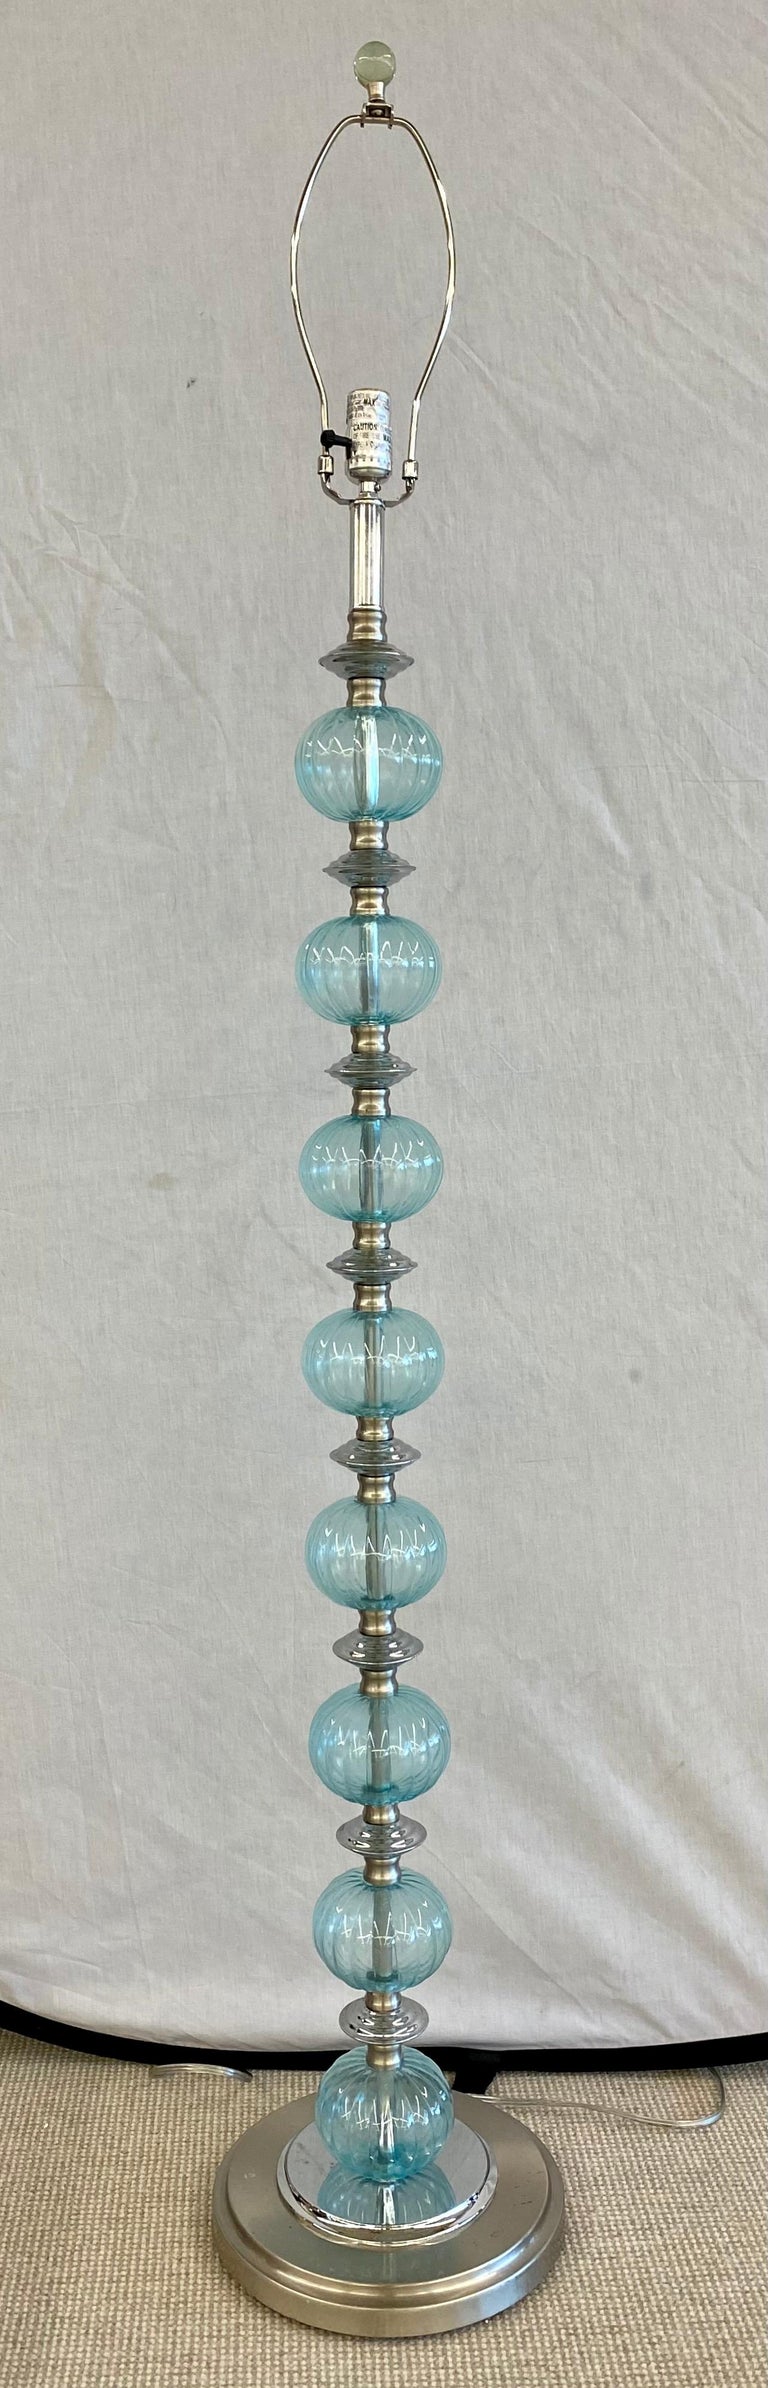 Mid-Century Modern murano glass standing floor lamp compromised of 8 murano glass blue tinted globes separated by a chrome column form center pole with chrome disks between each circular globe.